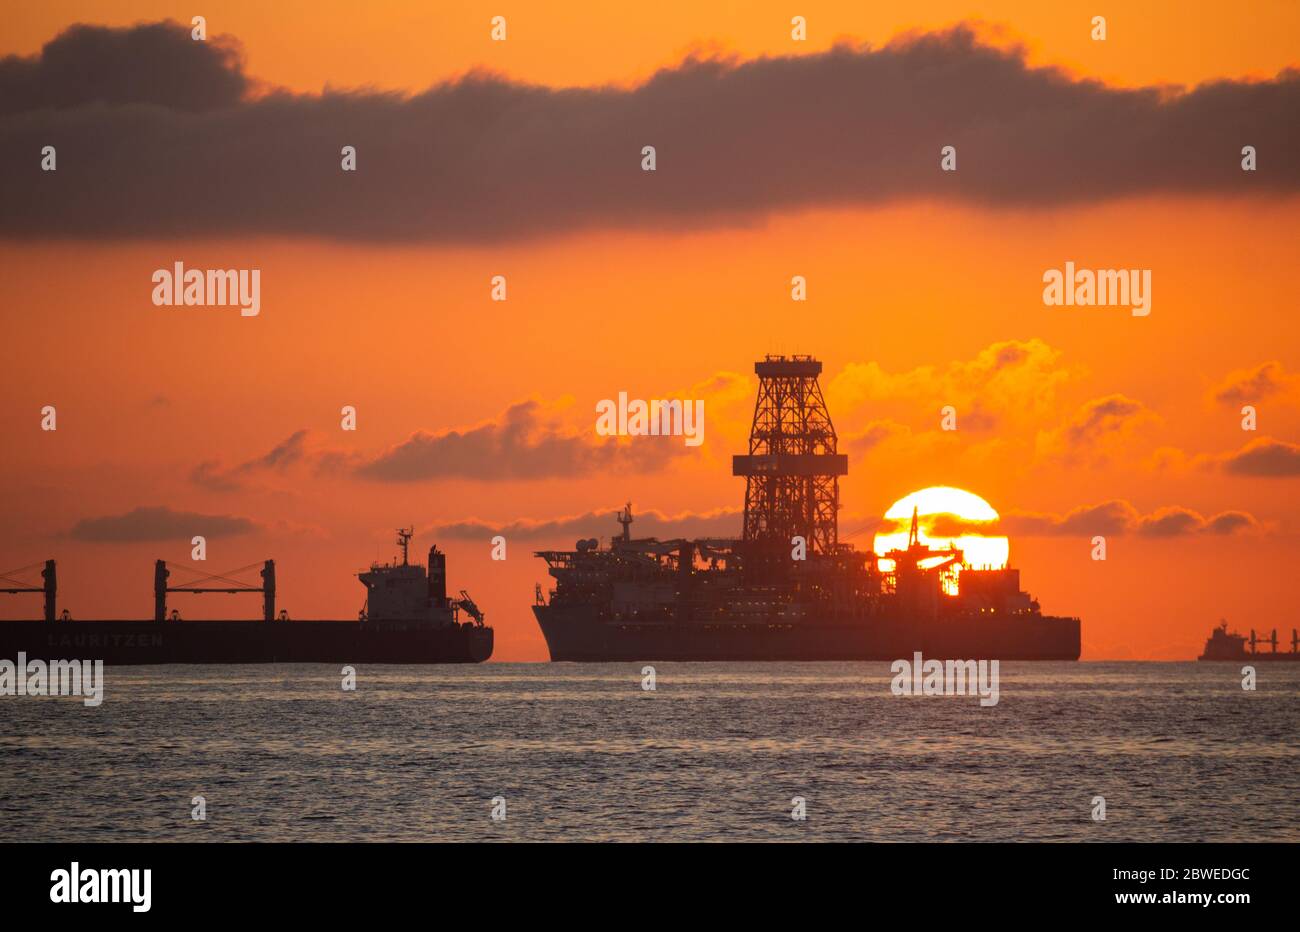 Las Palmas, Gran Canaria, Canary Islands, Spain. 1st June, 2020. The sun rises behind a drilling ship in Las Palmas on Gran Canaria. There are currently 13 oil rigs/drilling ships, mothballed or idle in Las Palmas port.  Credit:Alan Dawson/Alamy Live News. Stock Photo